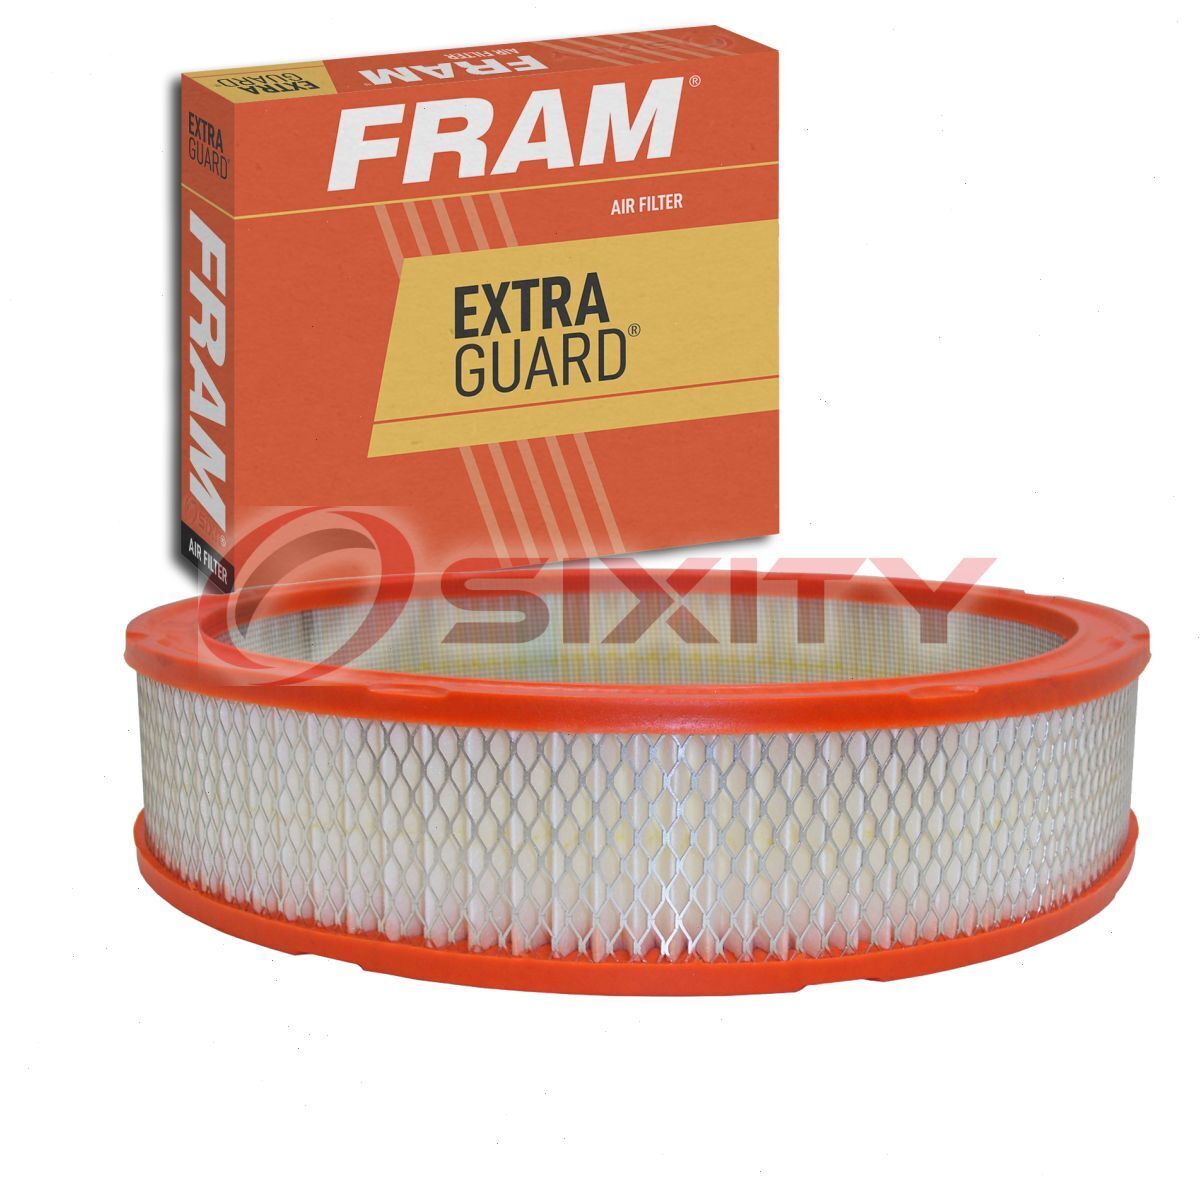 FRAM Extra Guard Air Filter for 1967-1978 Plymouth Fury Intake Inlet gi